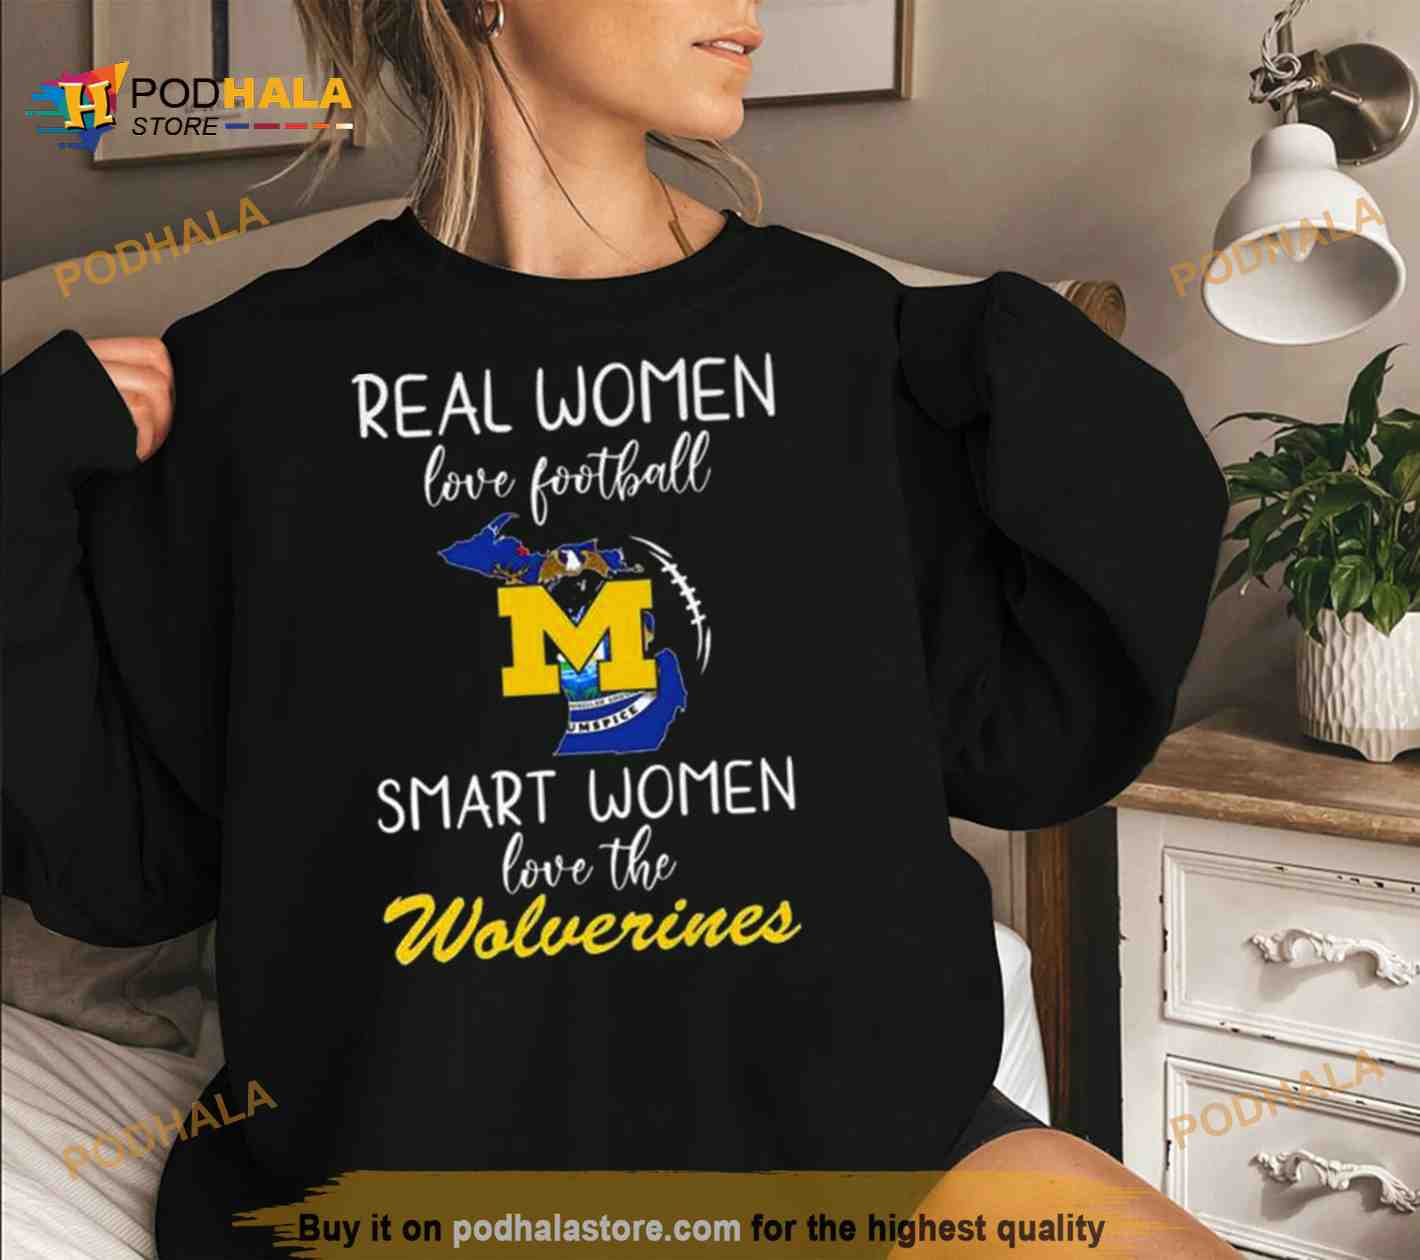 49ers Womens Shirt Real Woman Love Football Smart Women Love The 49ers -  Personalized Gifts: Family, Sports, Occasions, Trending